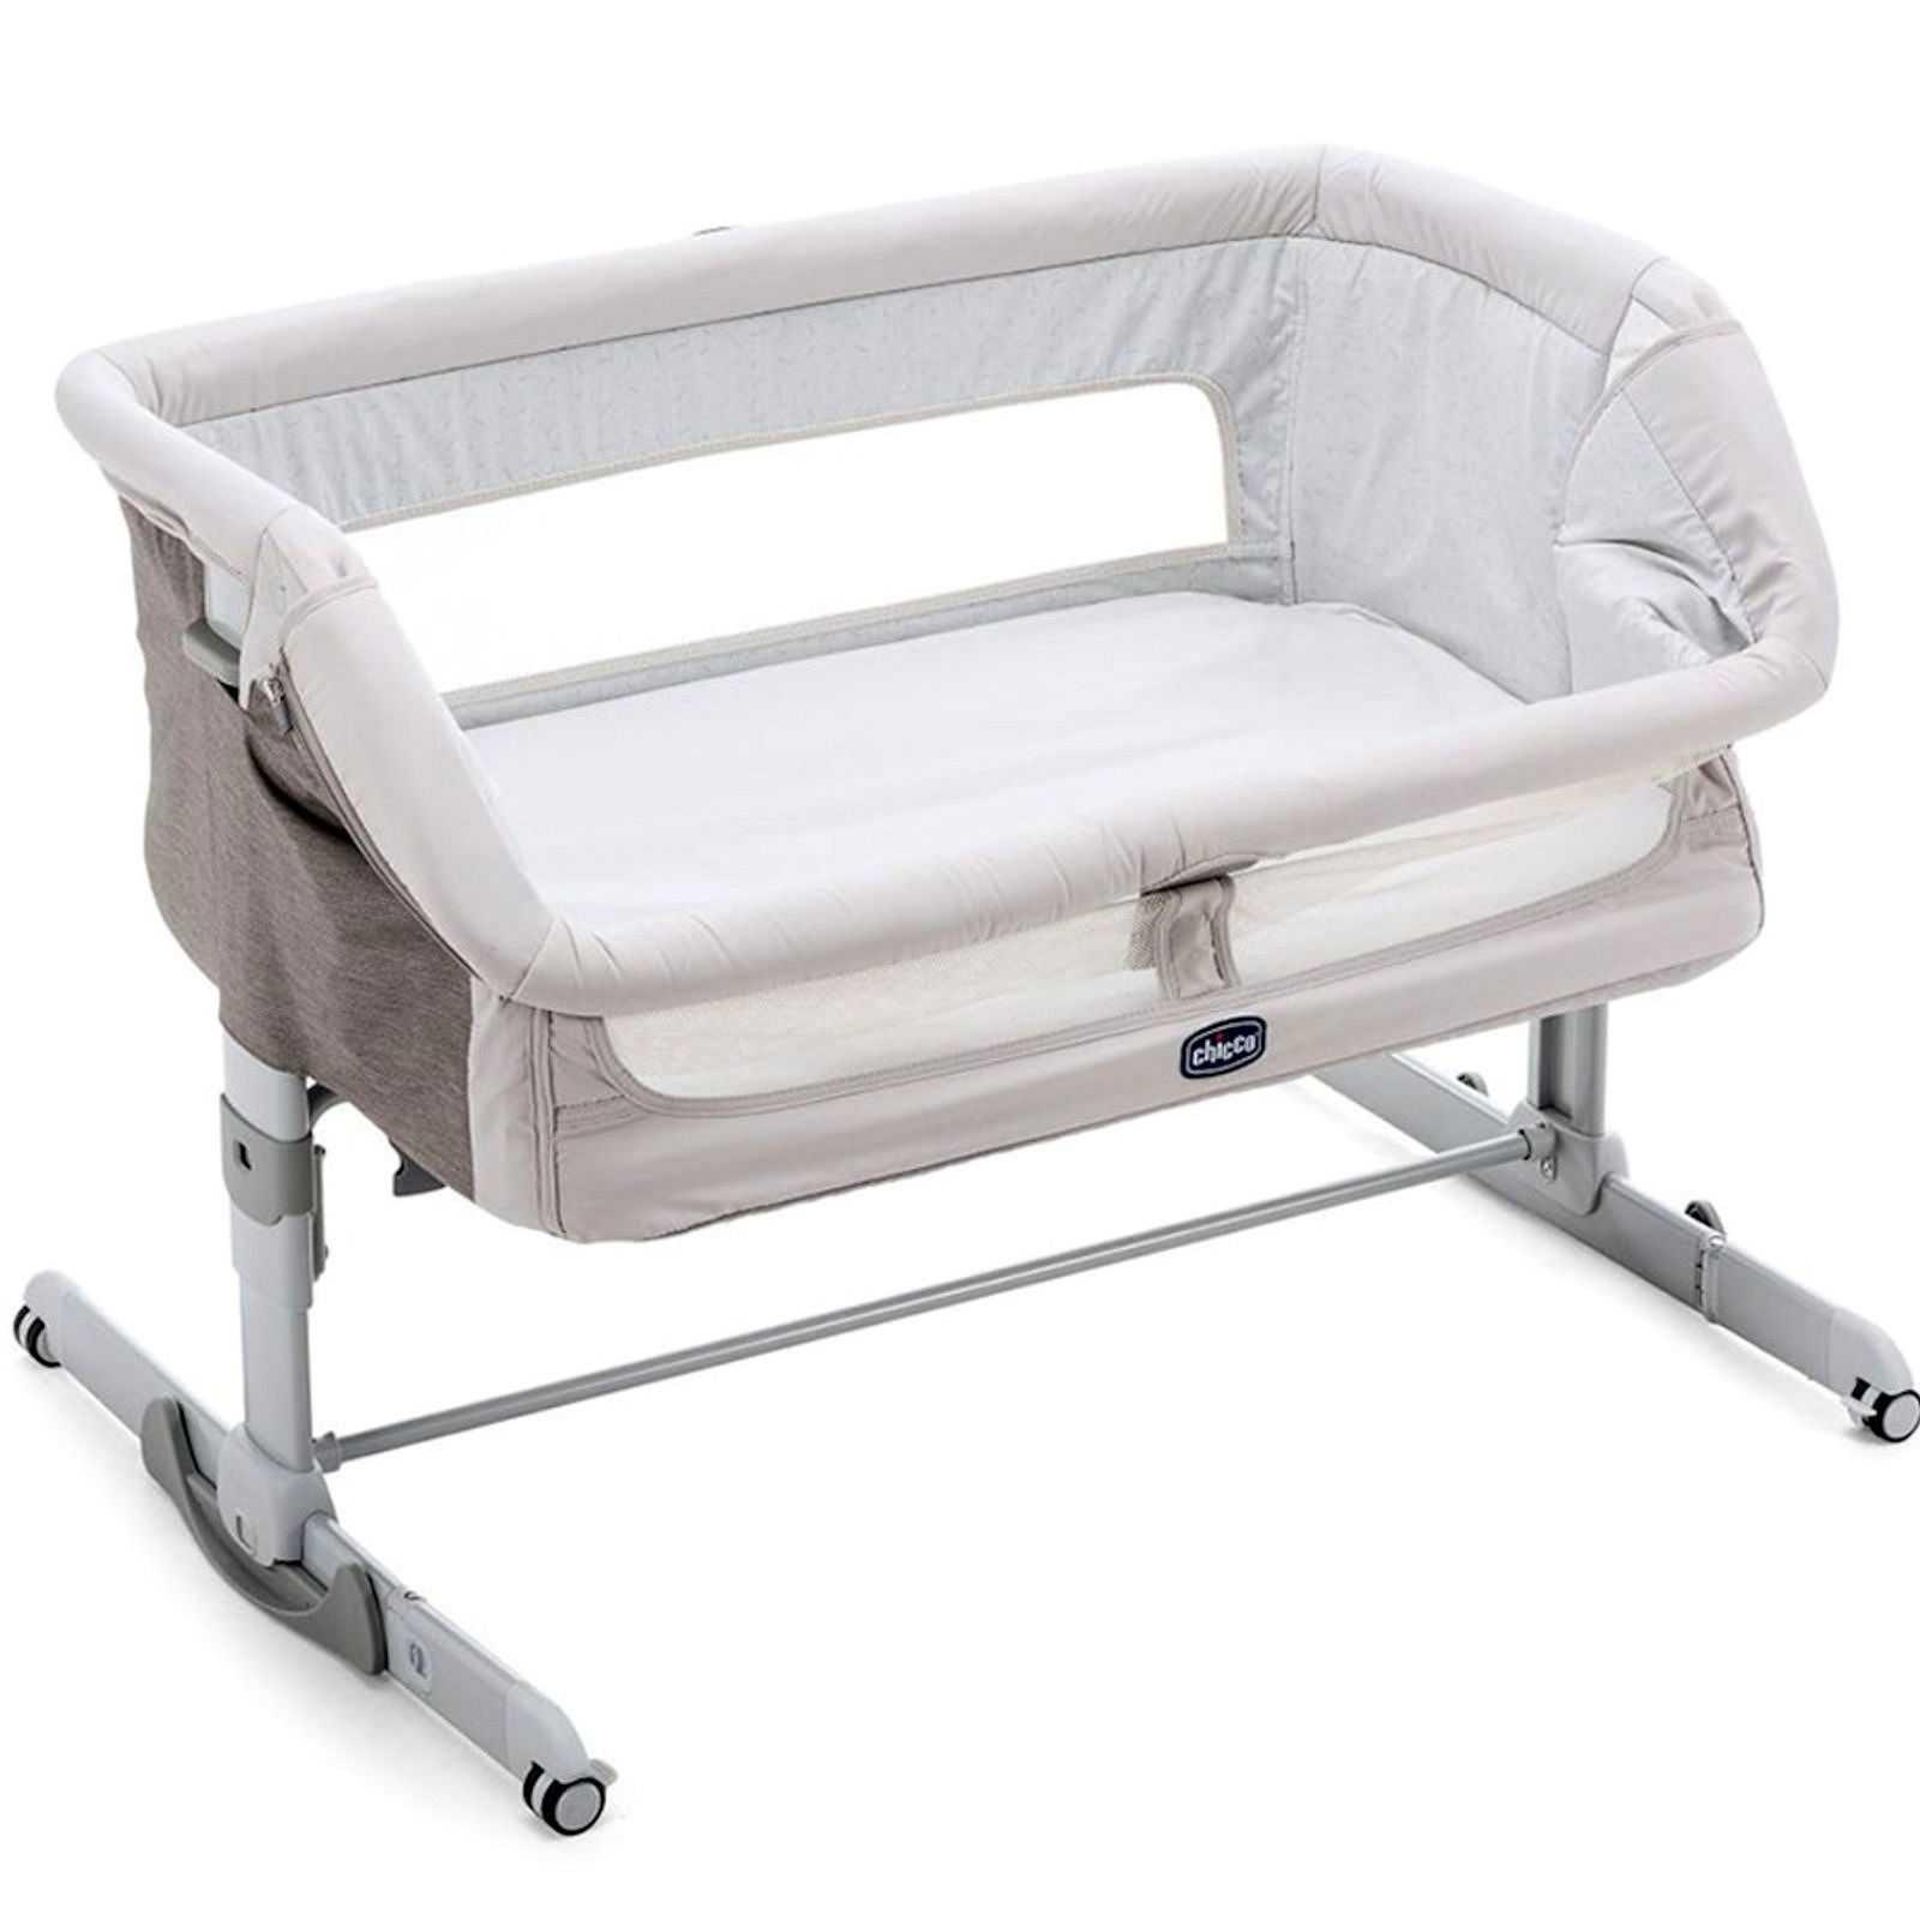 Rrp £170 Chicco Next To Me Crib With Bag